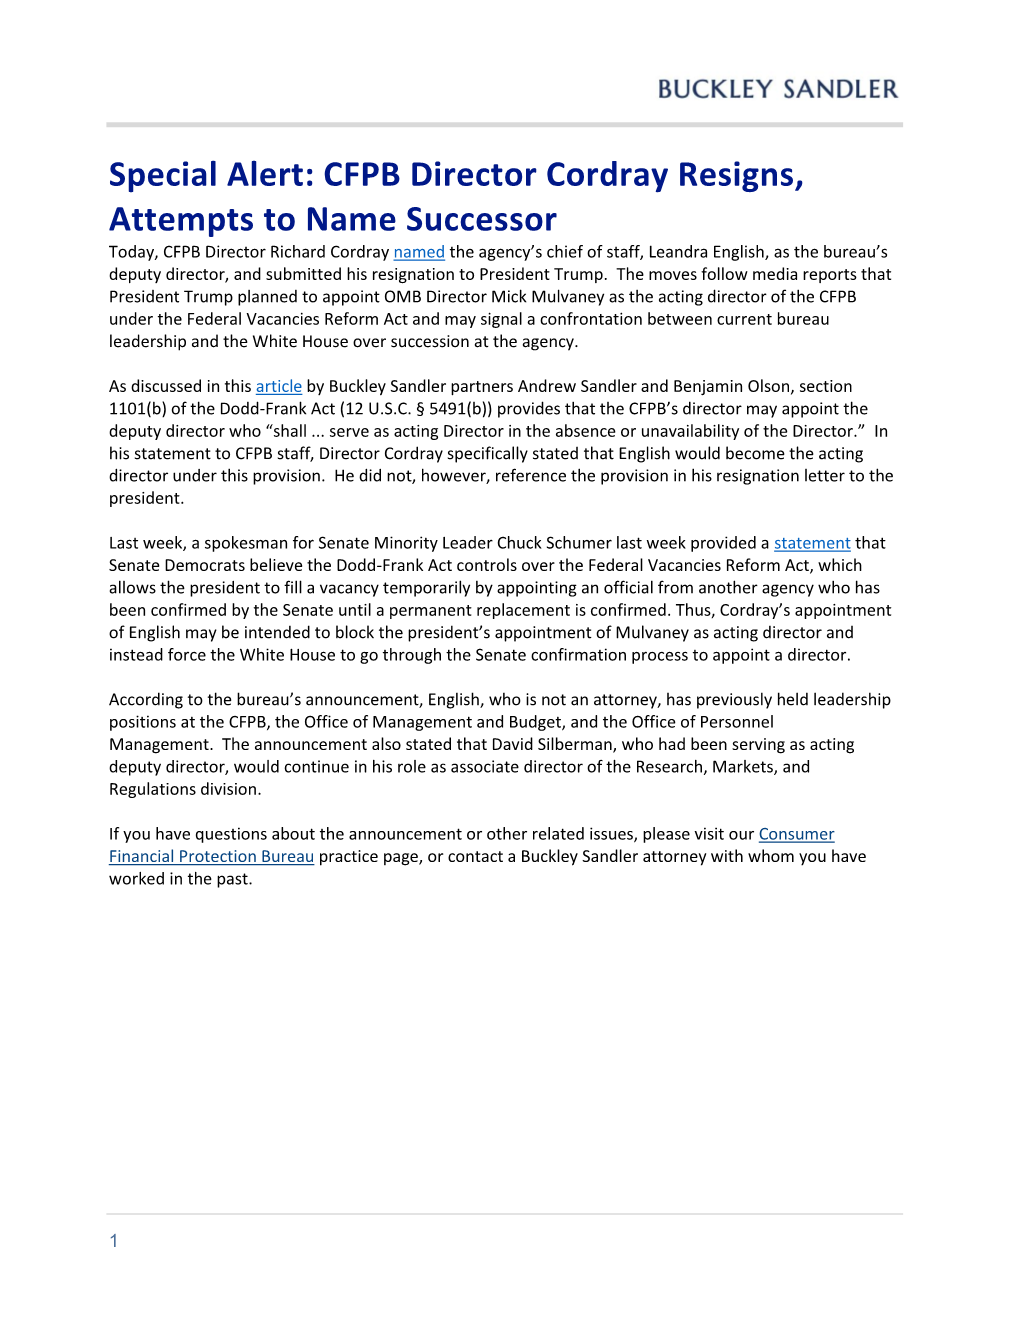 Special Alert: CFPB Director Cordray Resigns, Attempts to Name Successor